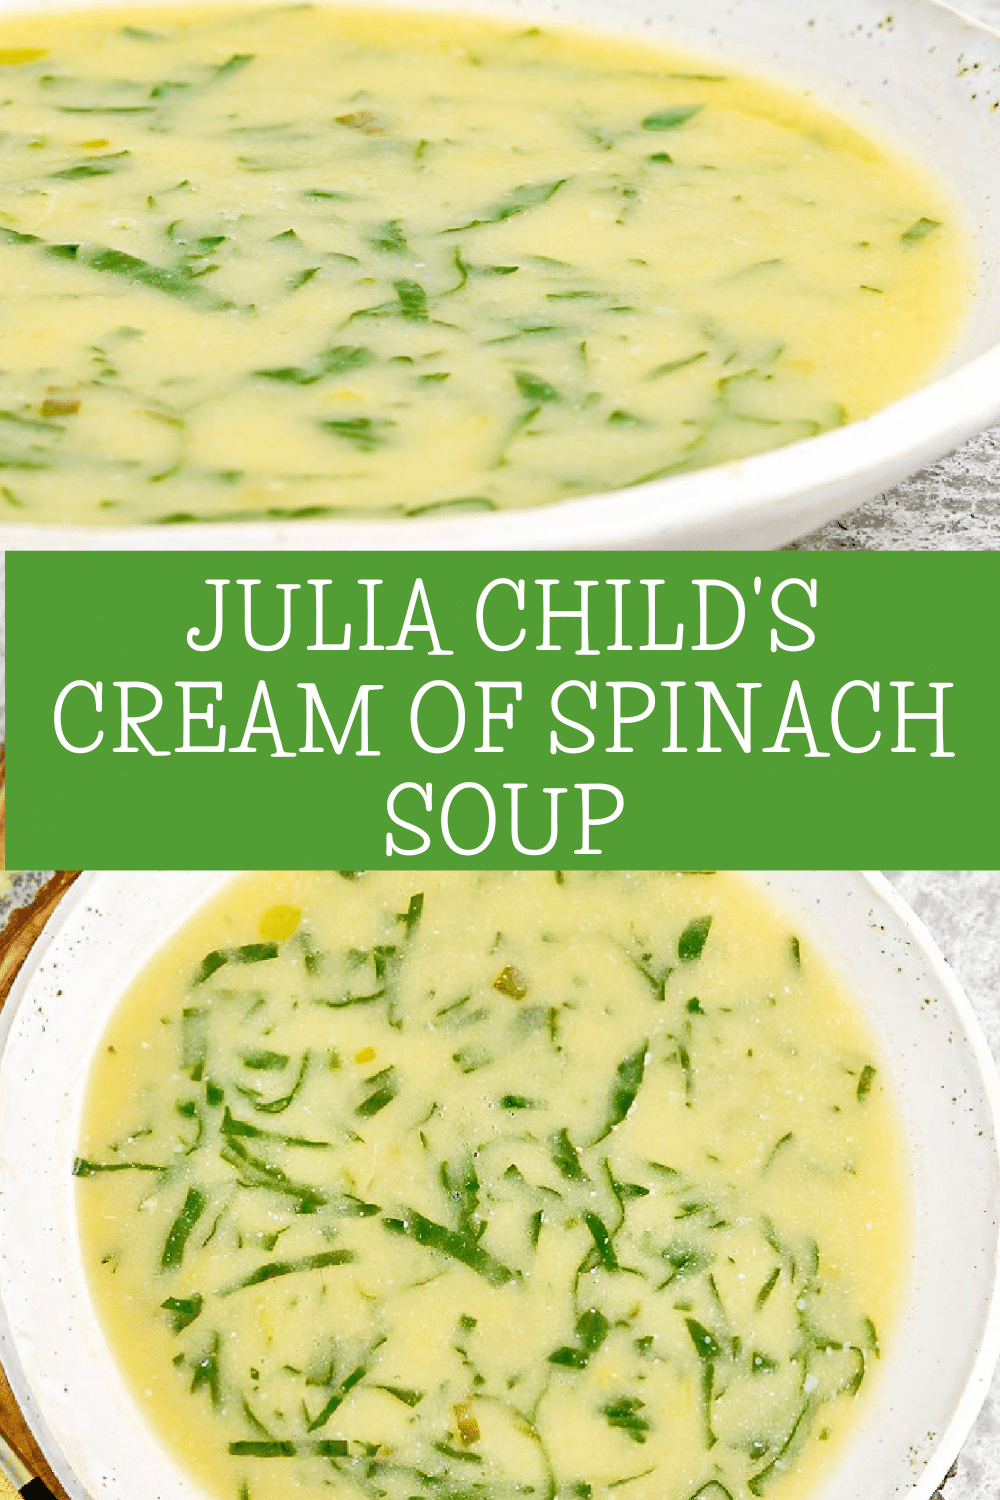 Julia Child's Cream of Spinach Soup ~ Potage Creme d'Epinards (Cream of Spinach Soup), described in Mastering the Art of French Cooking as, "...a lovely soup, and perfect for an important dinner."  via @thiswifecooks